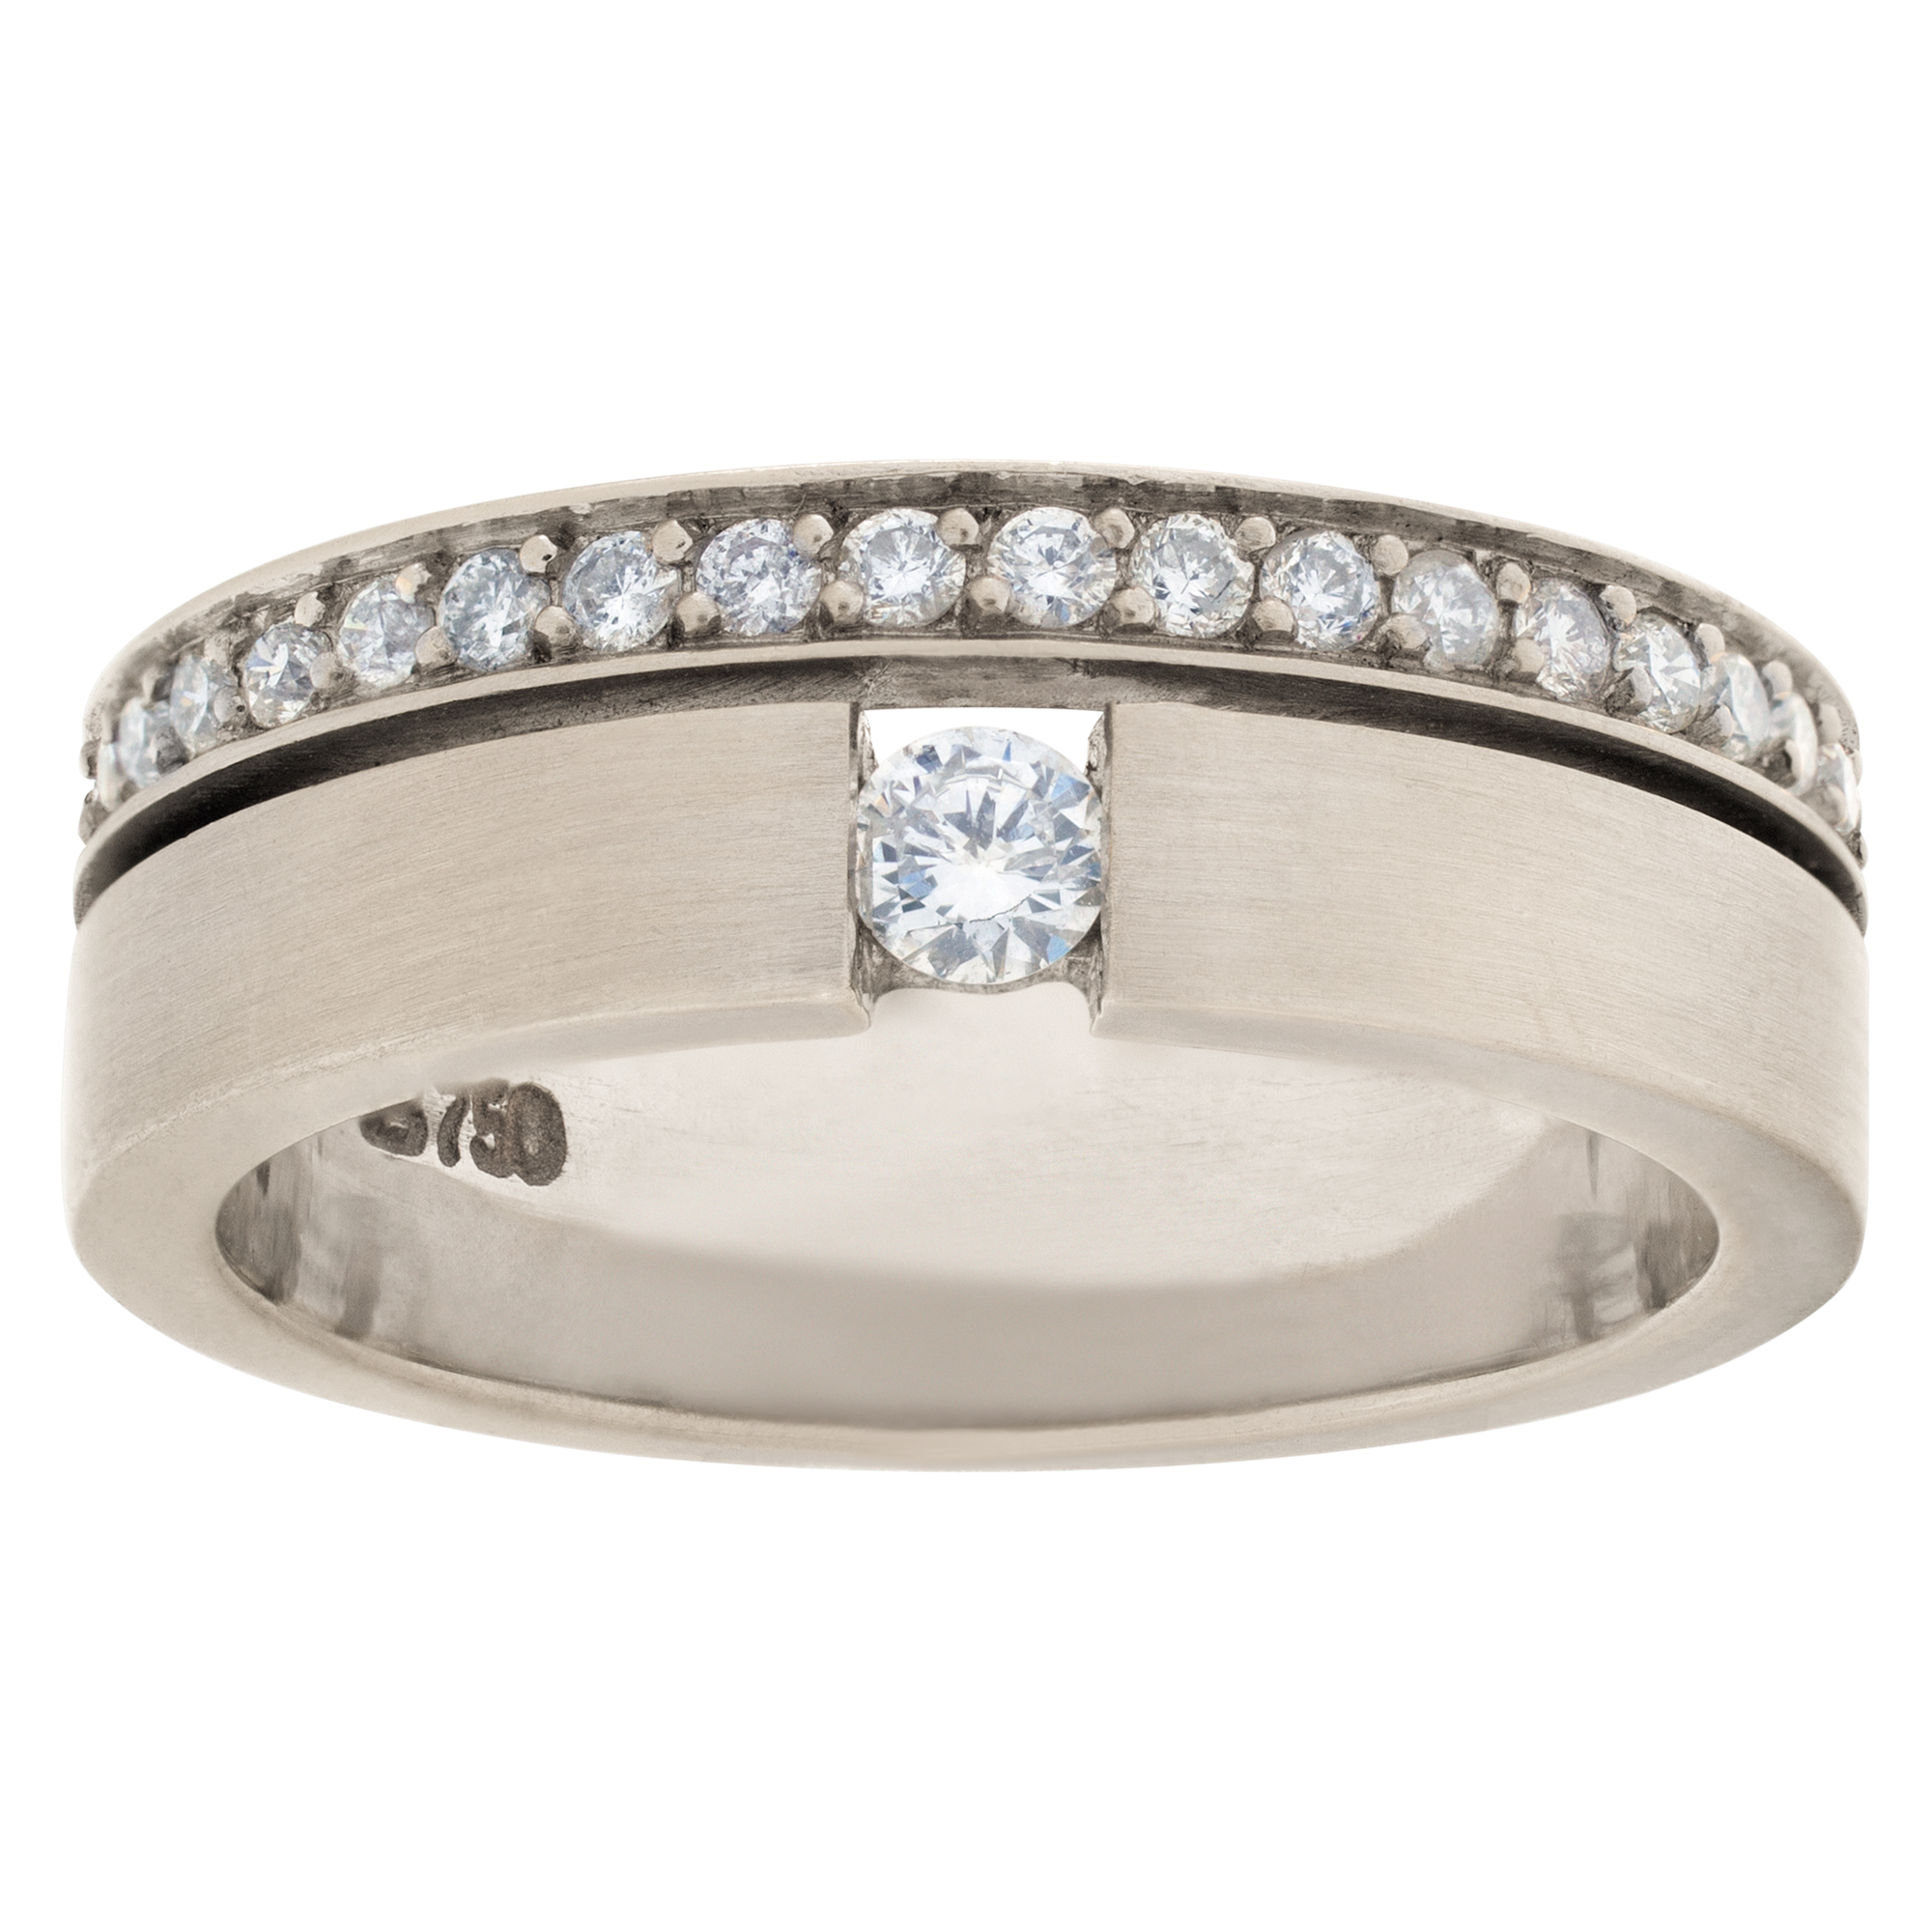 Diamond band in 18k white gold. 0.50 carats in diamonds. Size 7 1/2 image 1